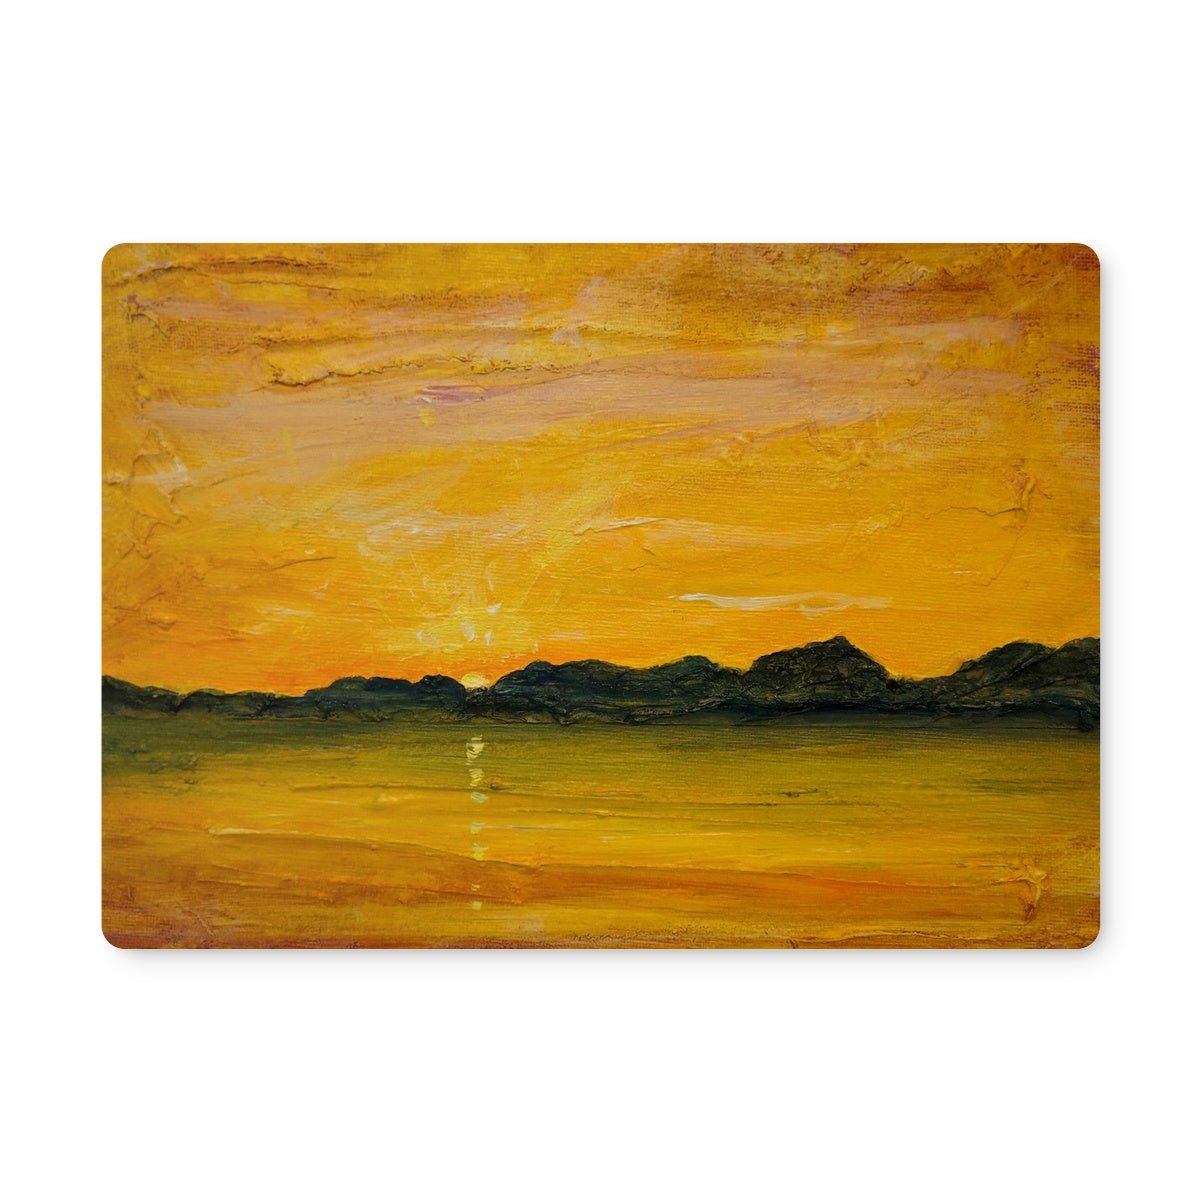 Jura Sunset Art Gifts Placemat-Placemats-Hebridean Islands Art Gallery-4 Placemats-Paintings, Prints, Homeware, Art Gifts From Scotland By Scottish Artist Kevin Hunter